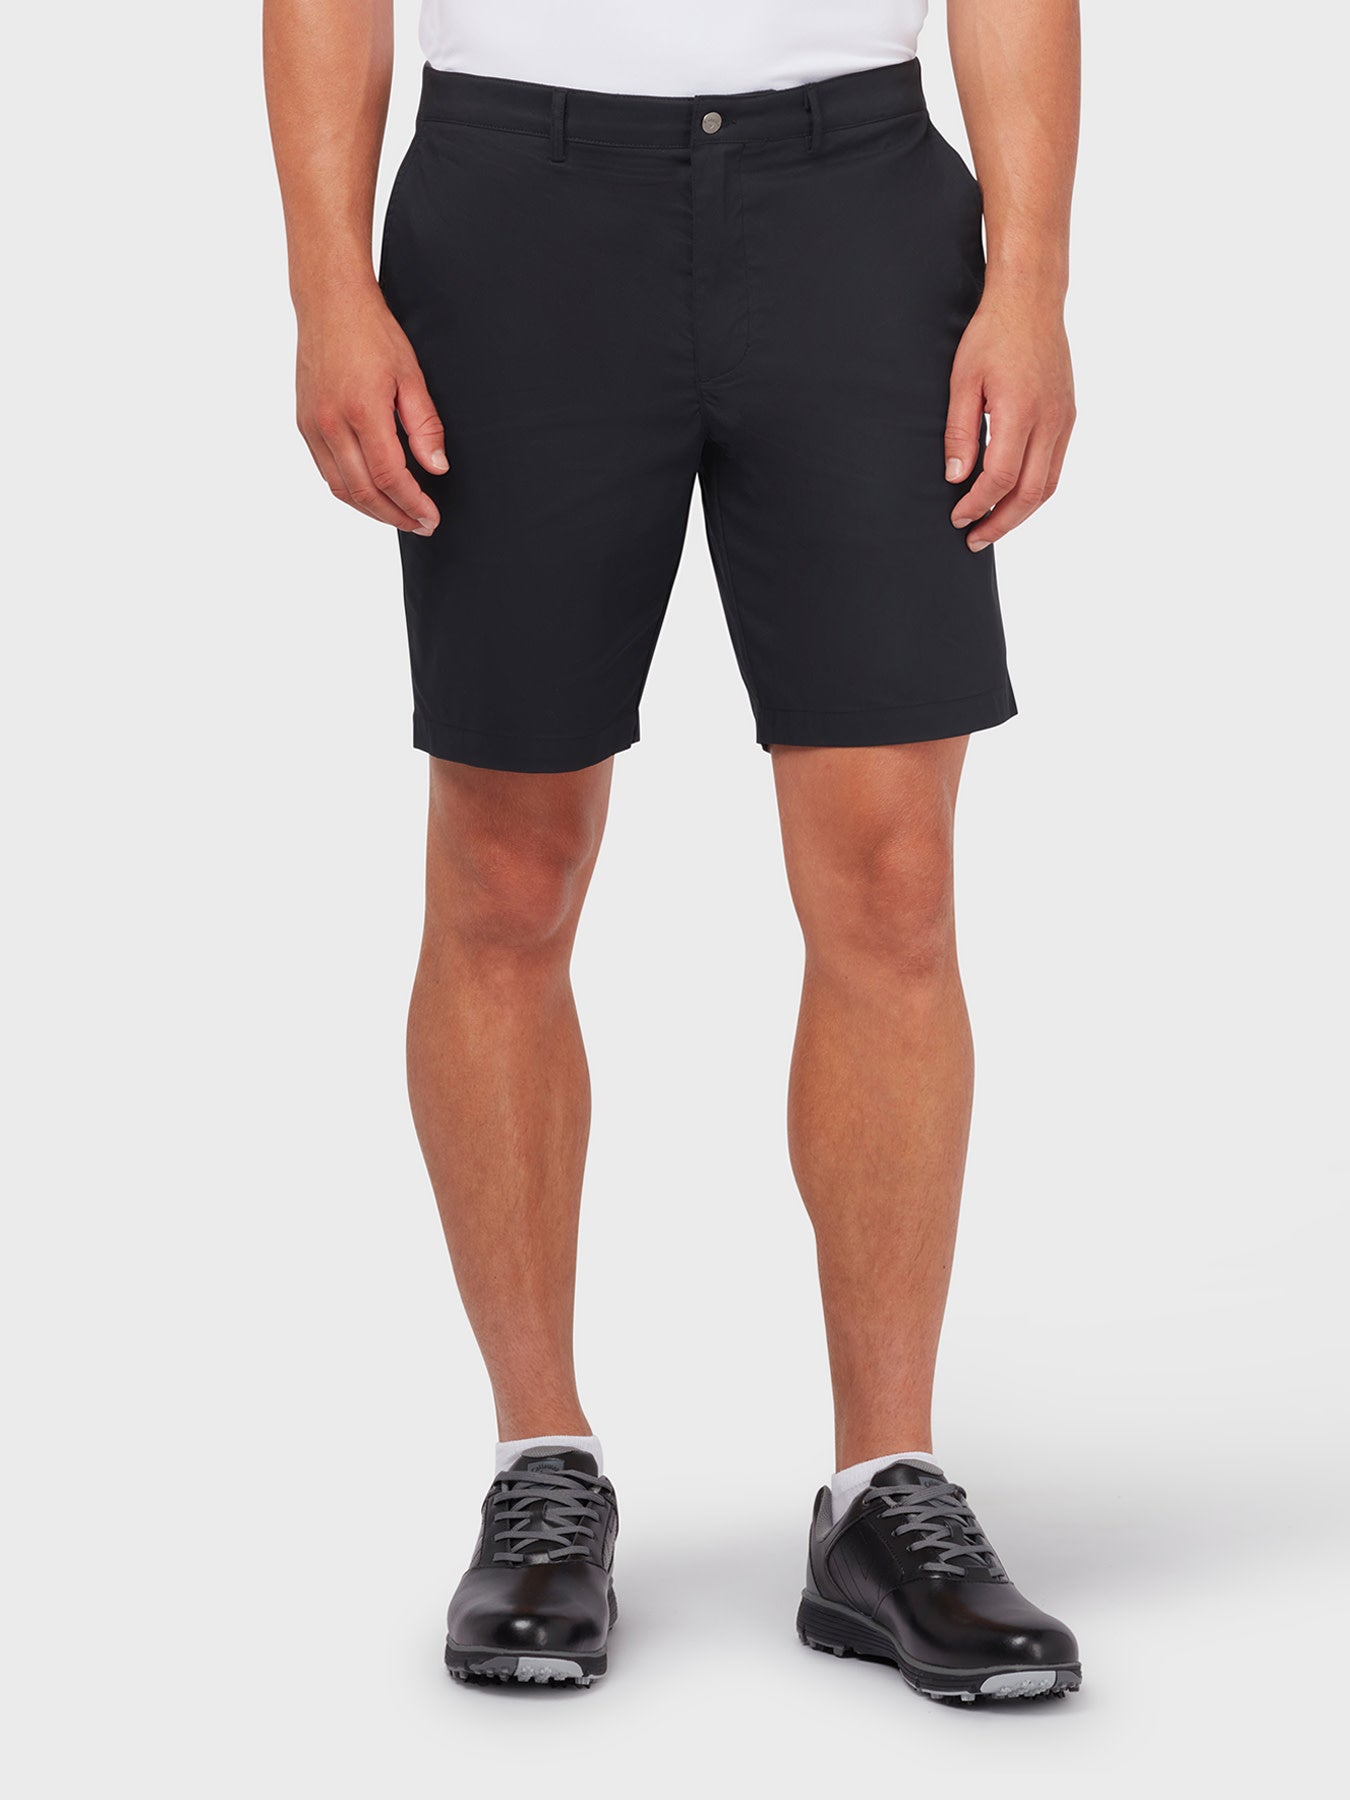 View X Series Flat Fronted Short In Caviar Caviar 34 information